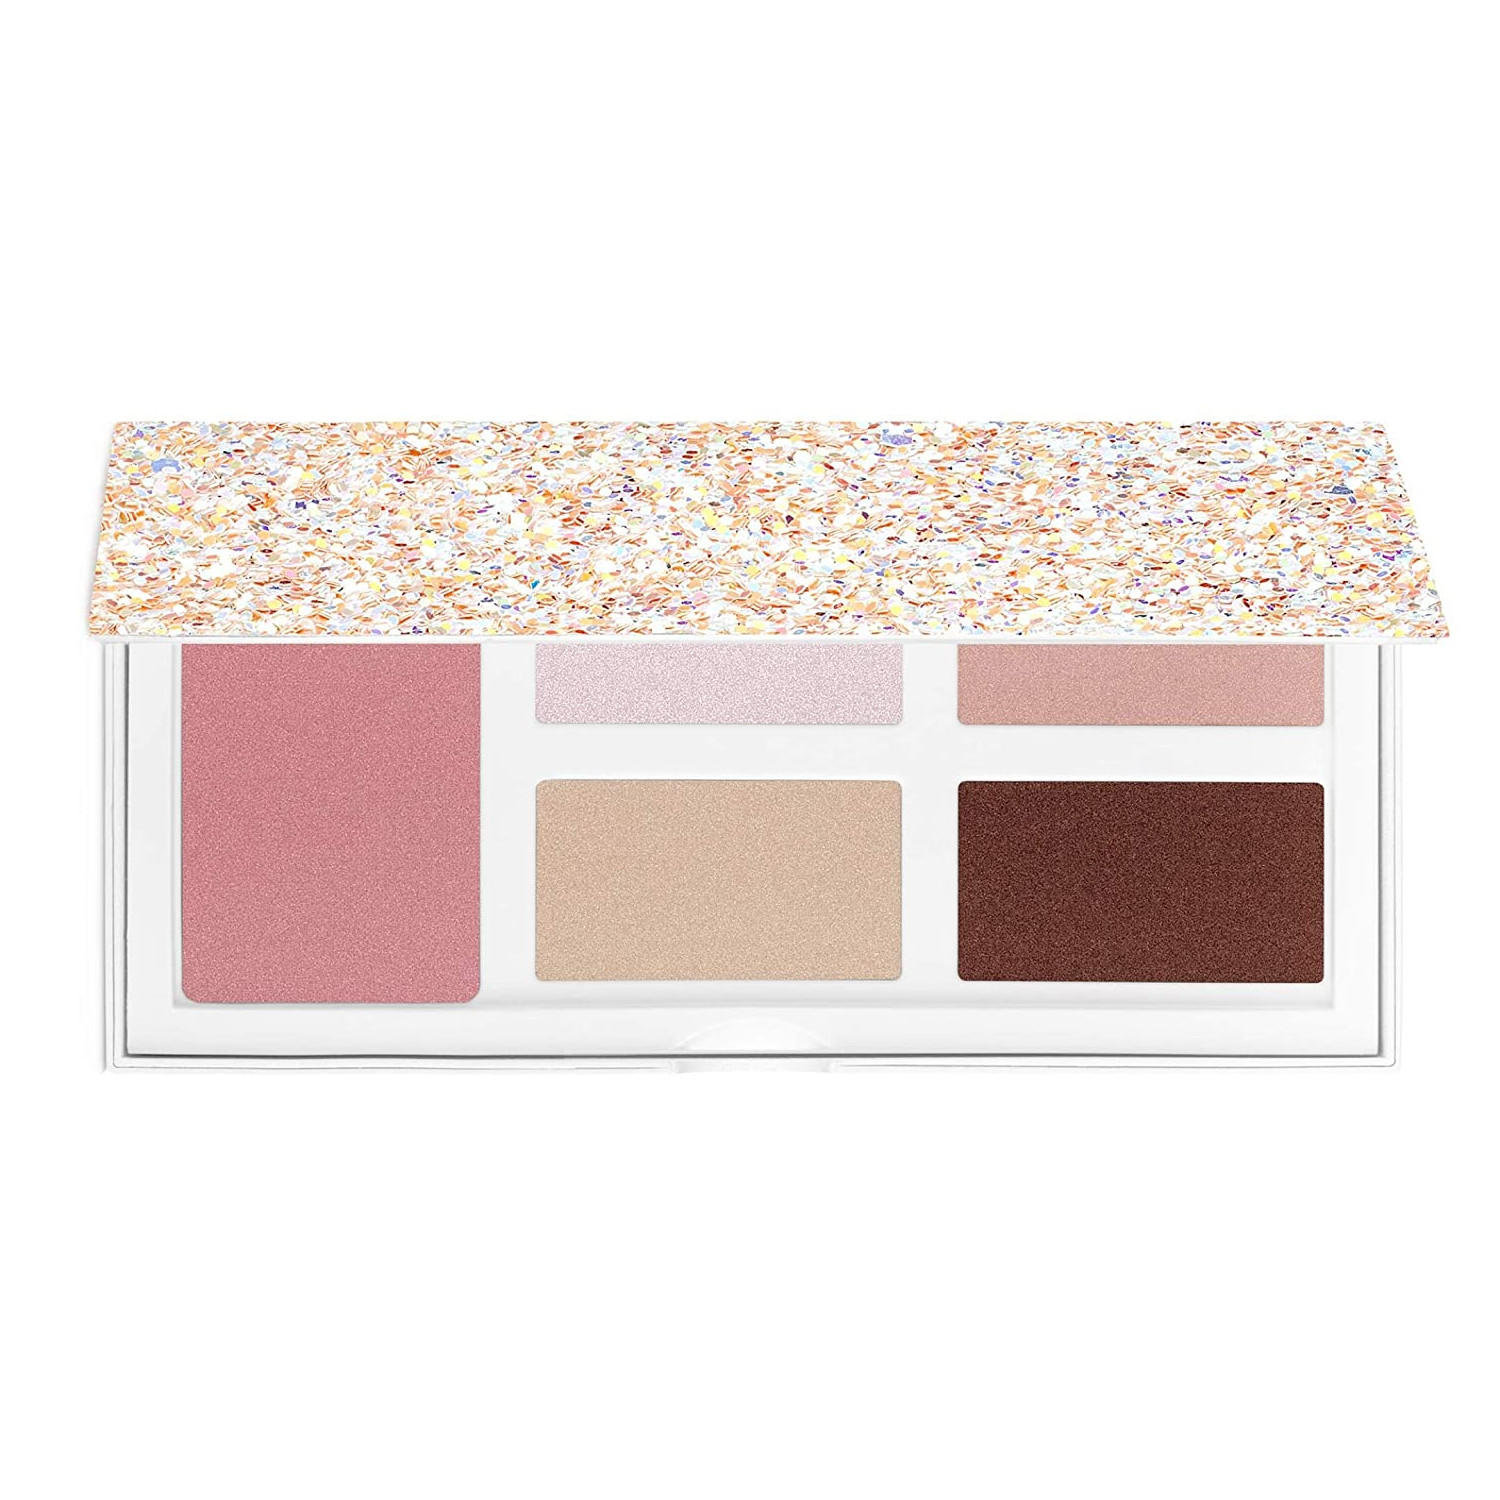 Clinique Limited Edition Twinkle Eye & Cheek Palette